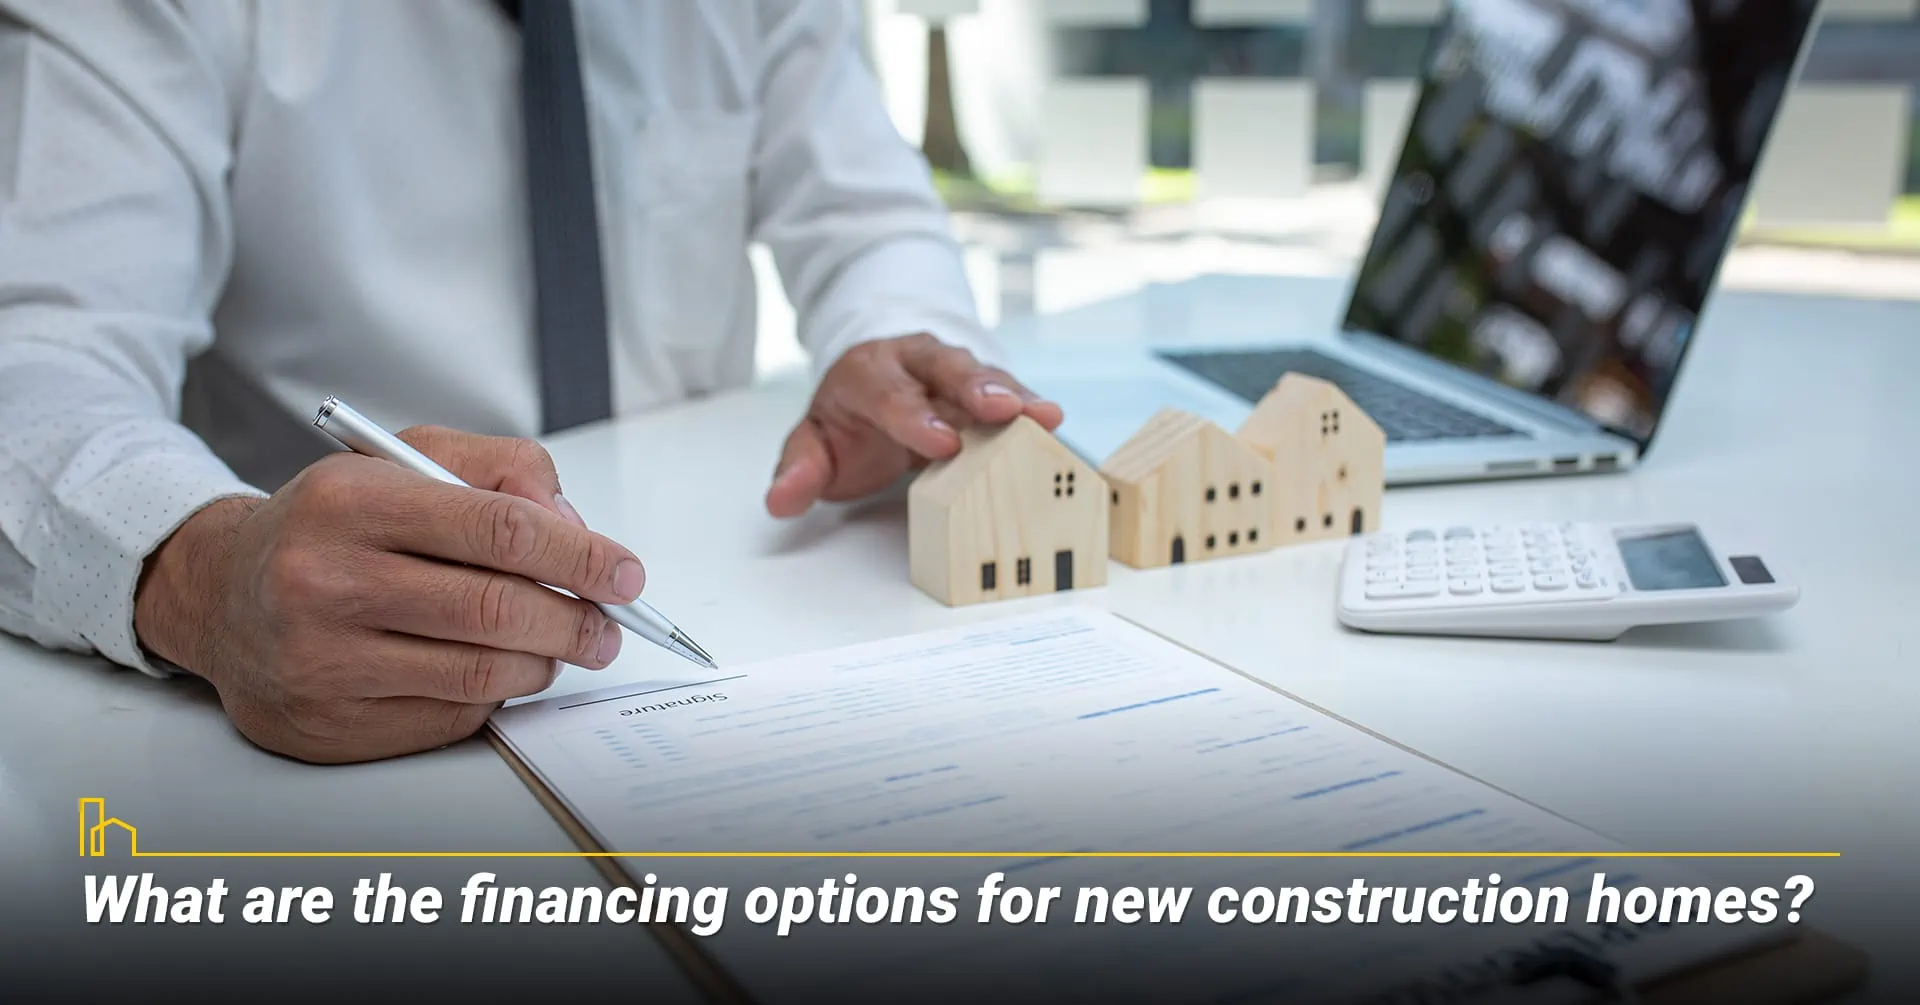 What are the financing options for new construction homes?